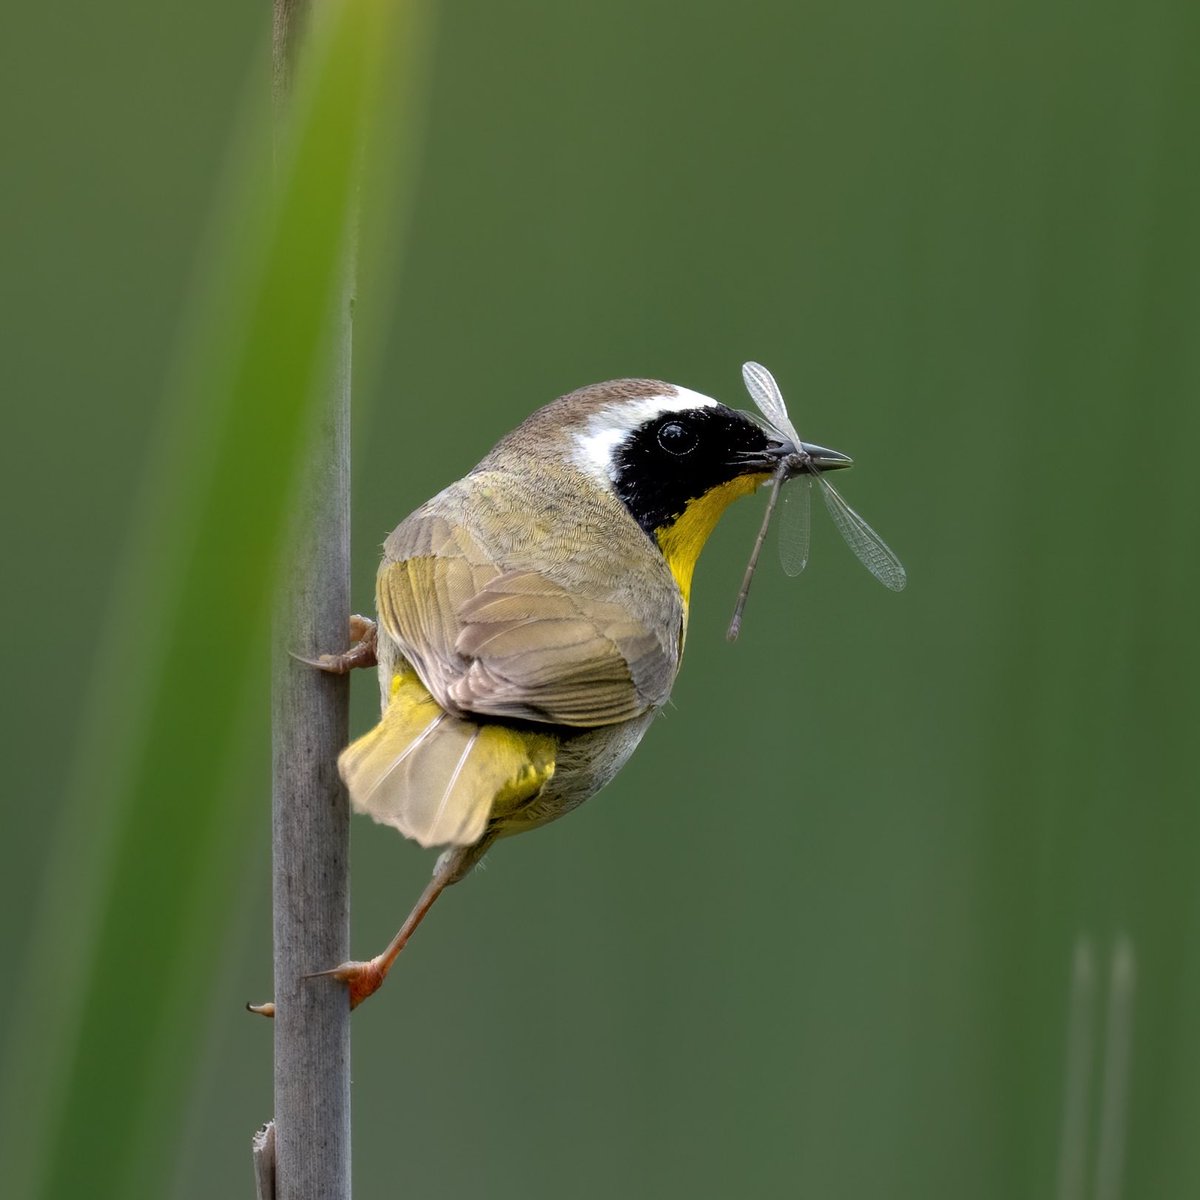 A papa common yellowthroat with a dragonfly 

#commonyellowthroat #birds #warblers#twitternaturecommunity #birdphotography